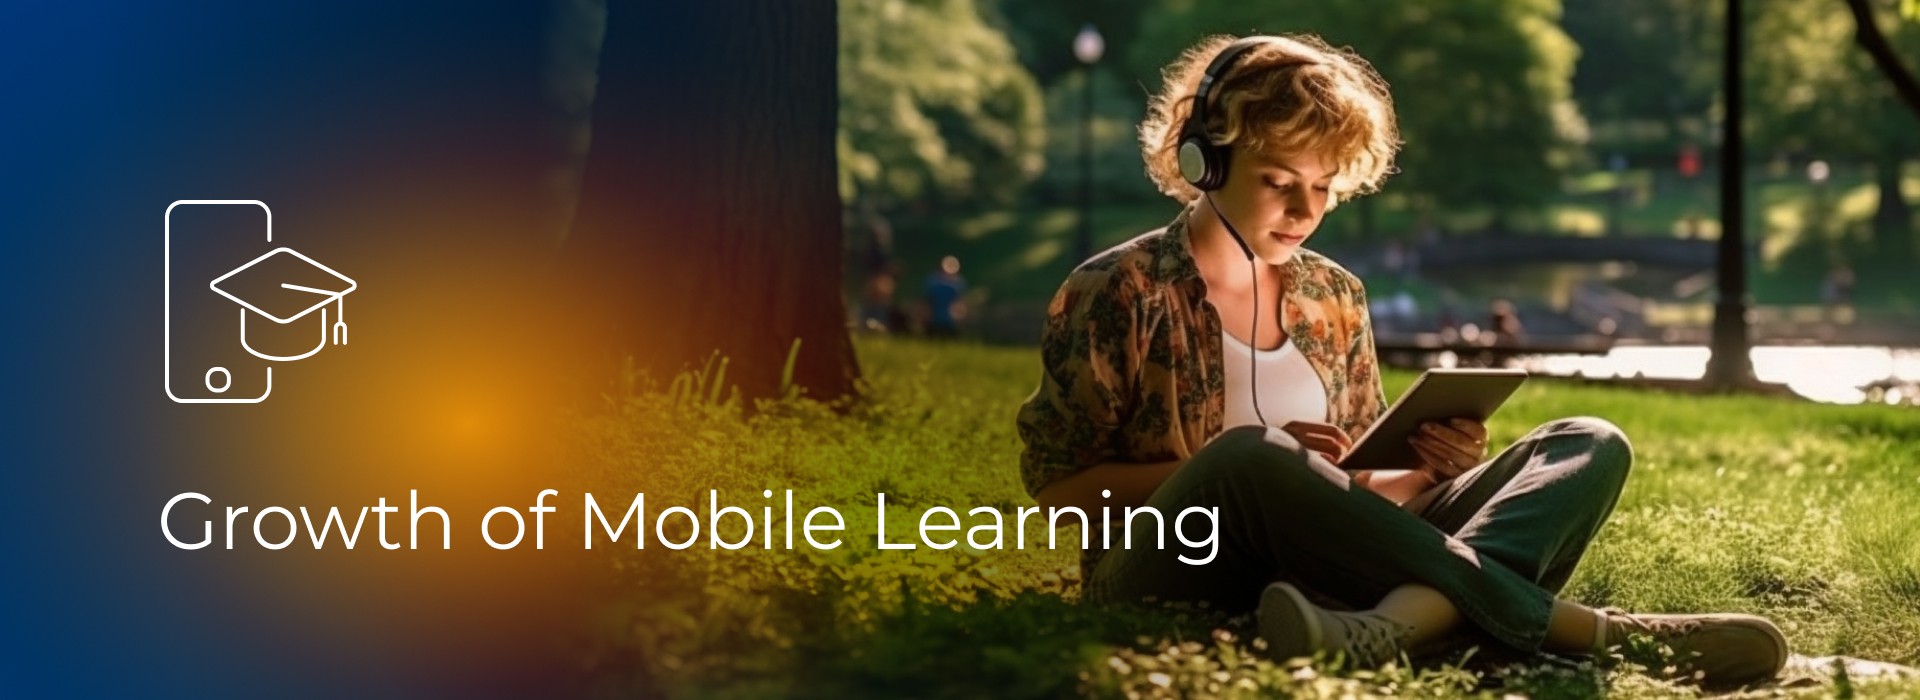 Growth of Mobile Learning